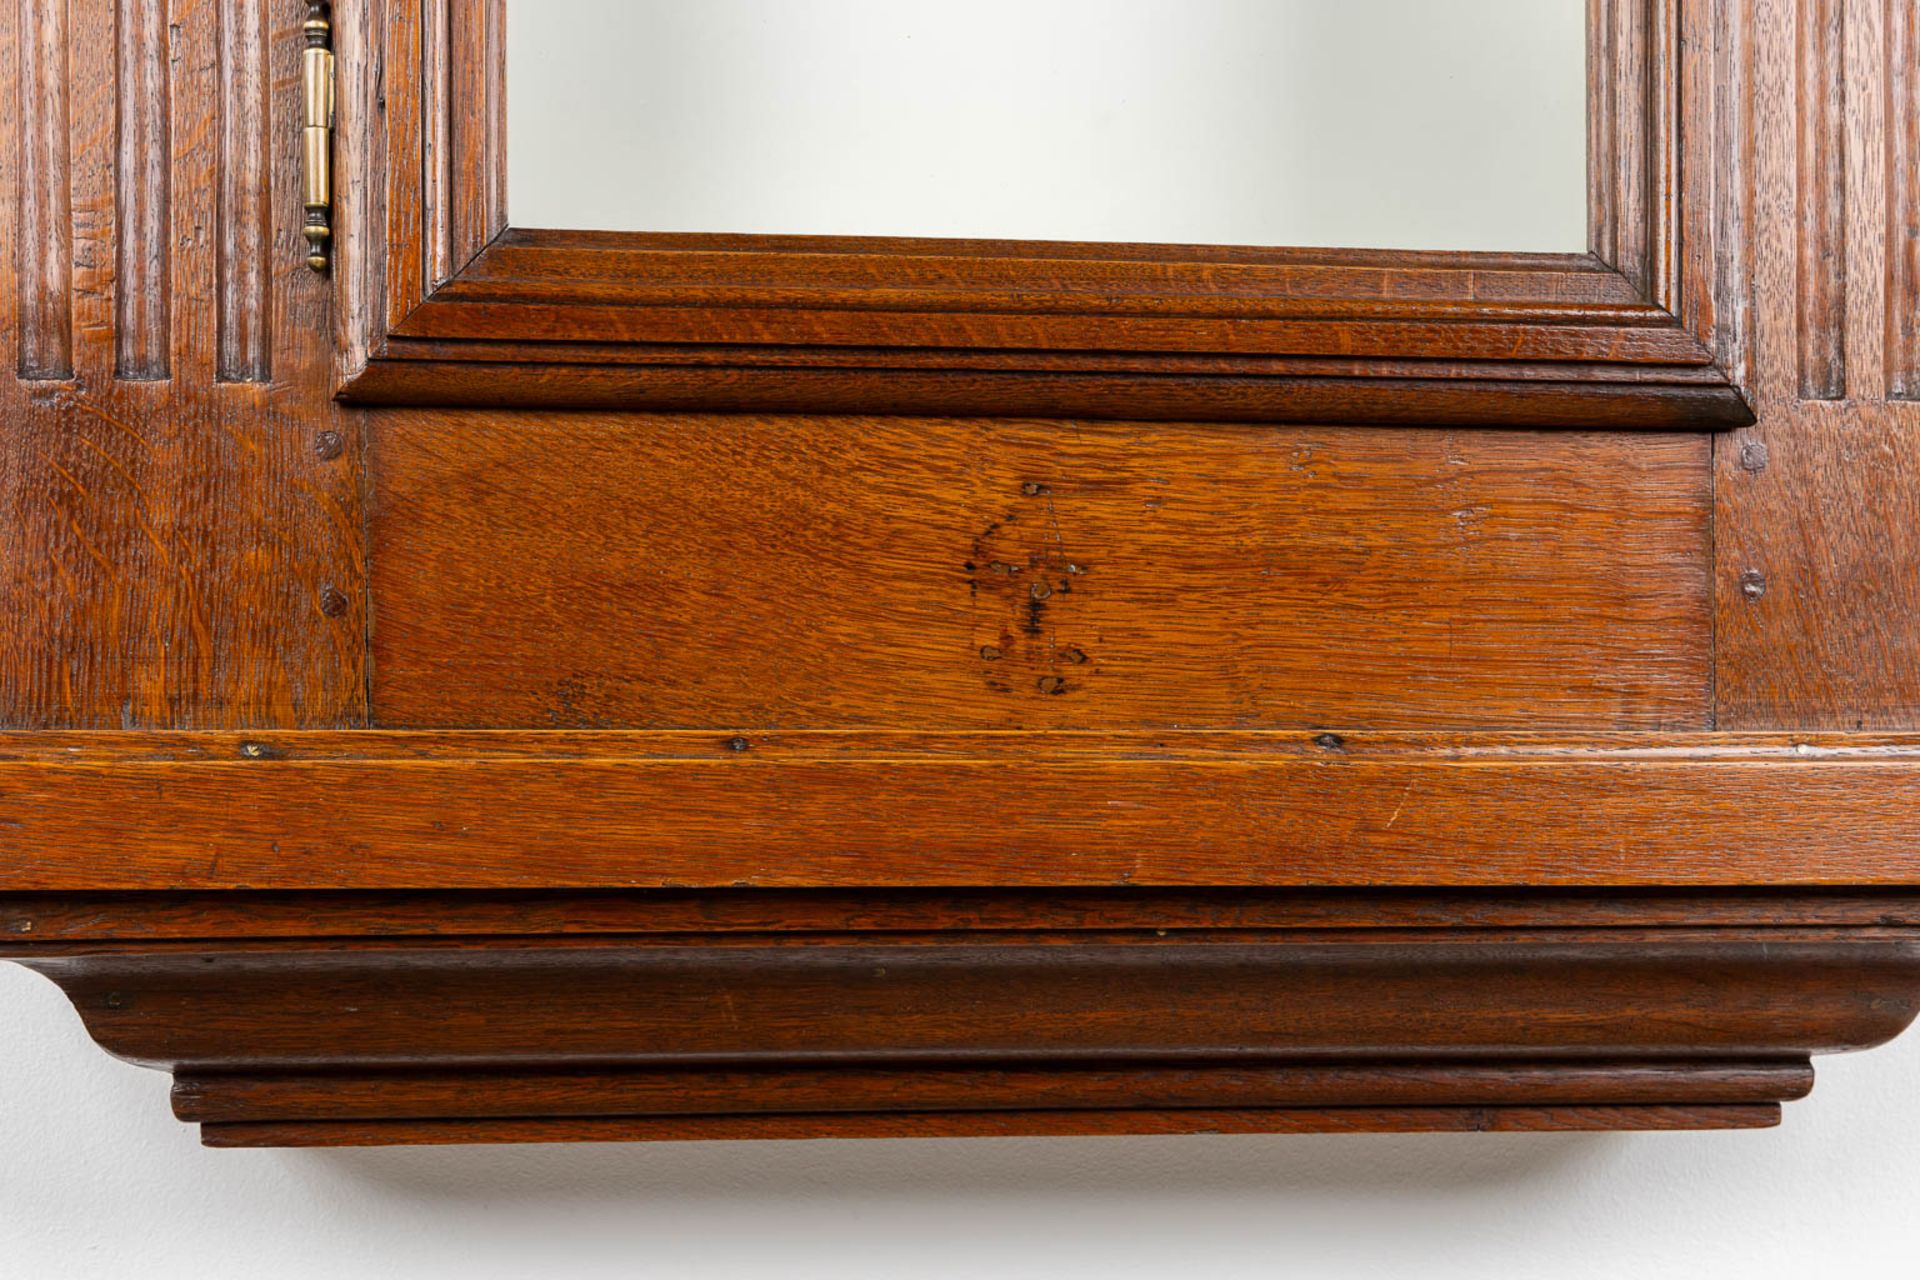 A small wall-mounted display cabinet, Oak, 19th C. (L:23 x W:75 x H:96 cm) - Image 6 of 8